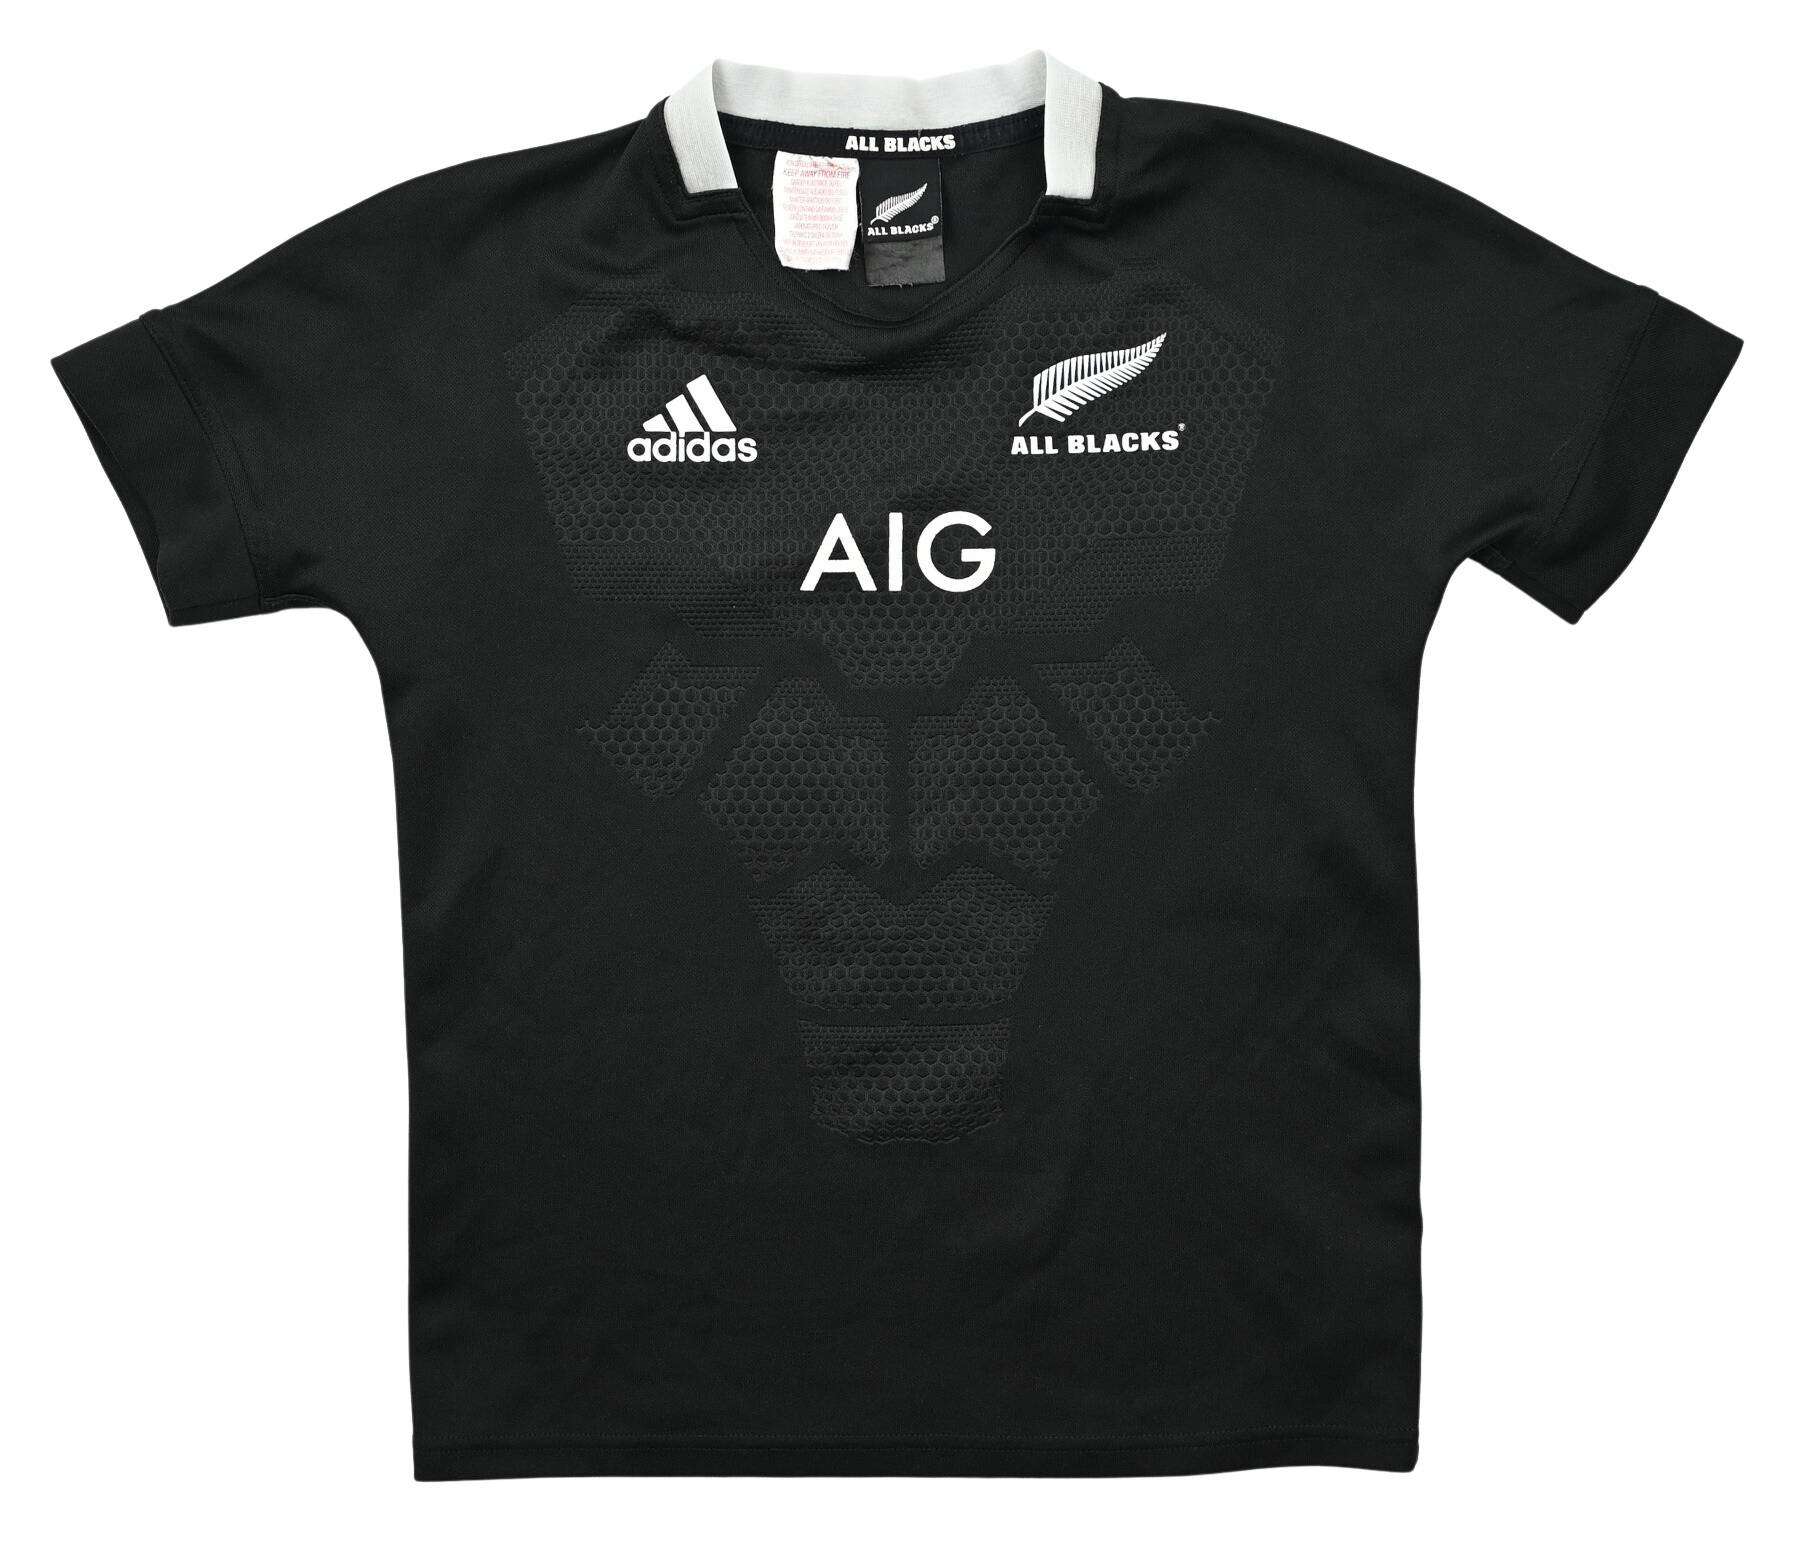 All Blacks New Zealand Rugby Shirt M Boys Rugby Rugby Union New